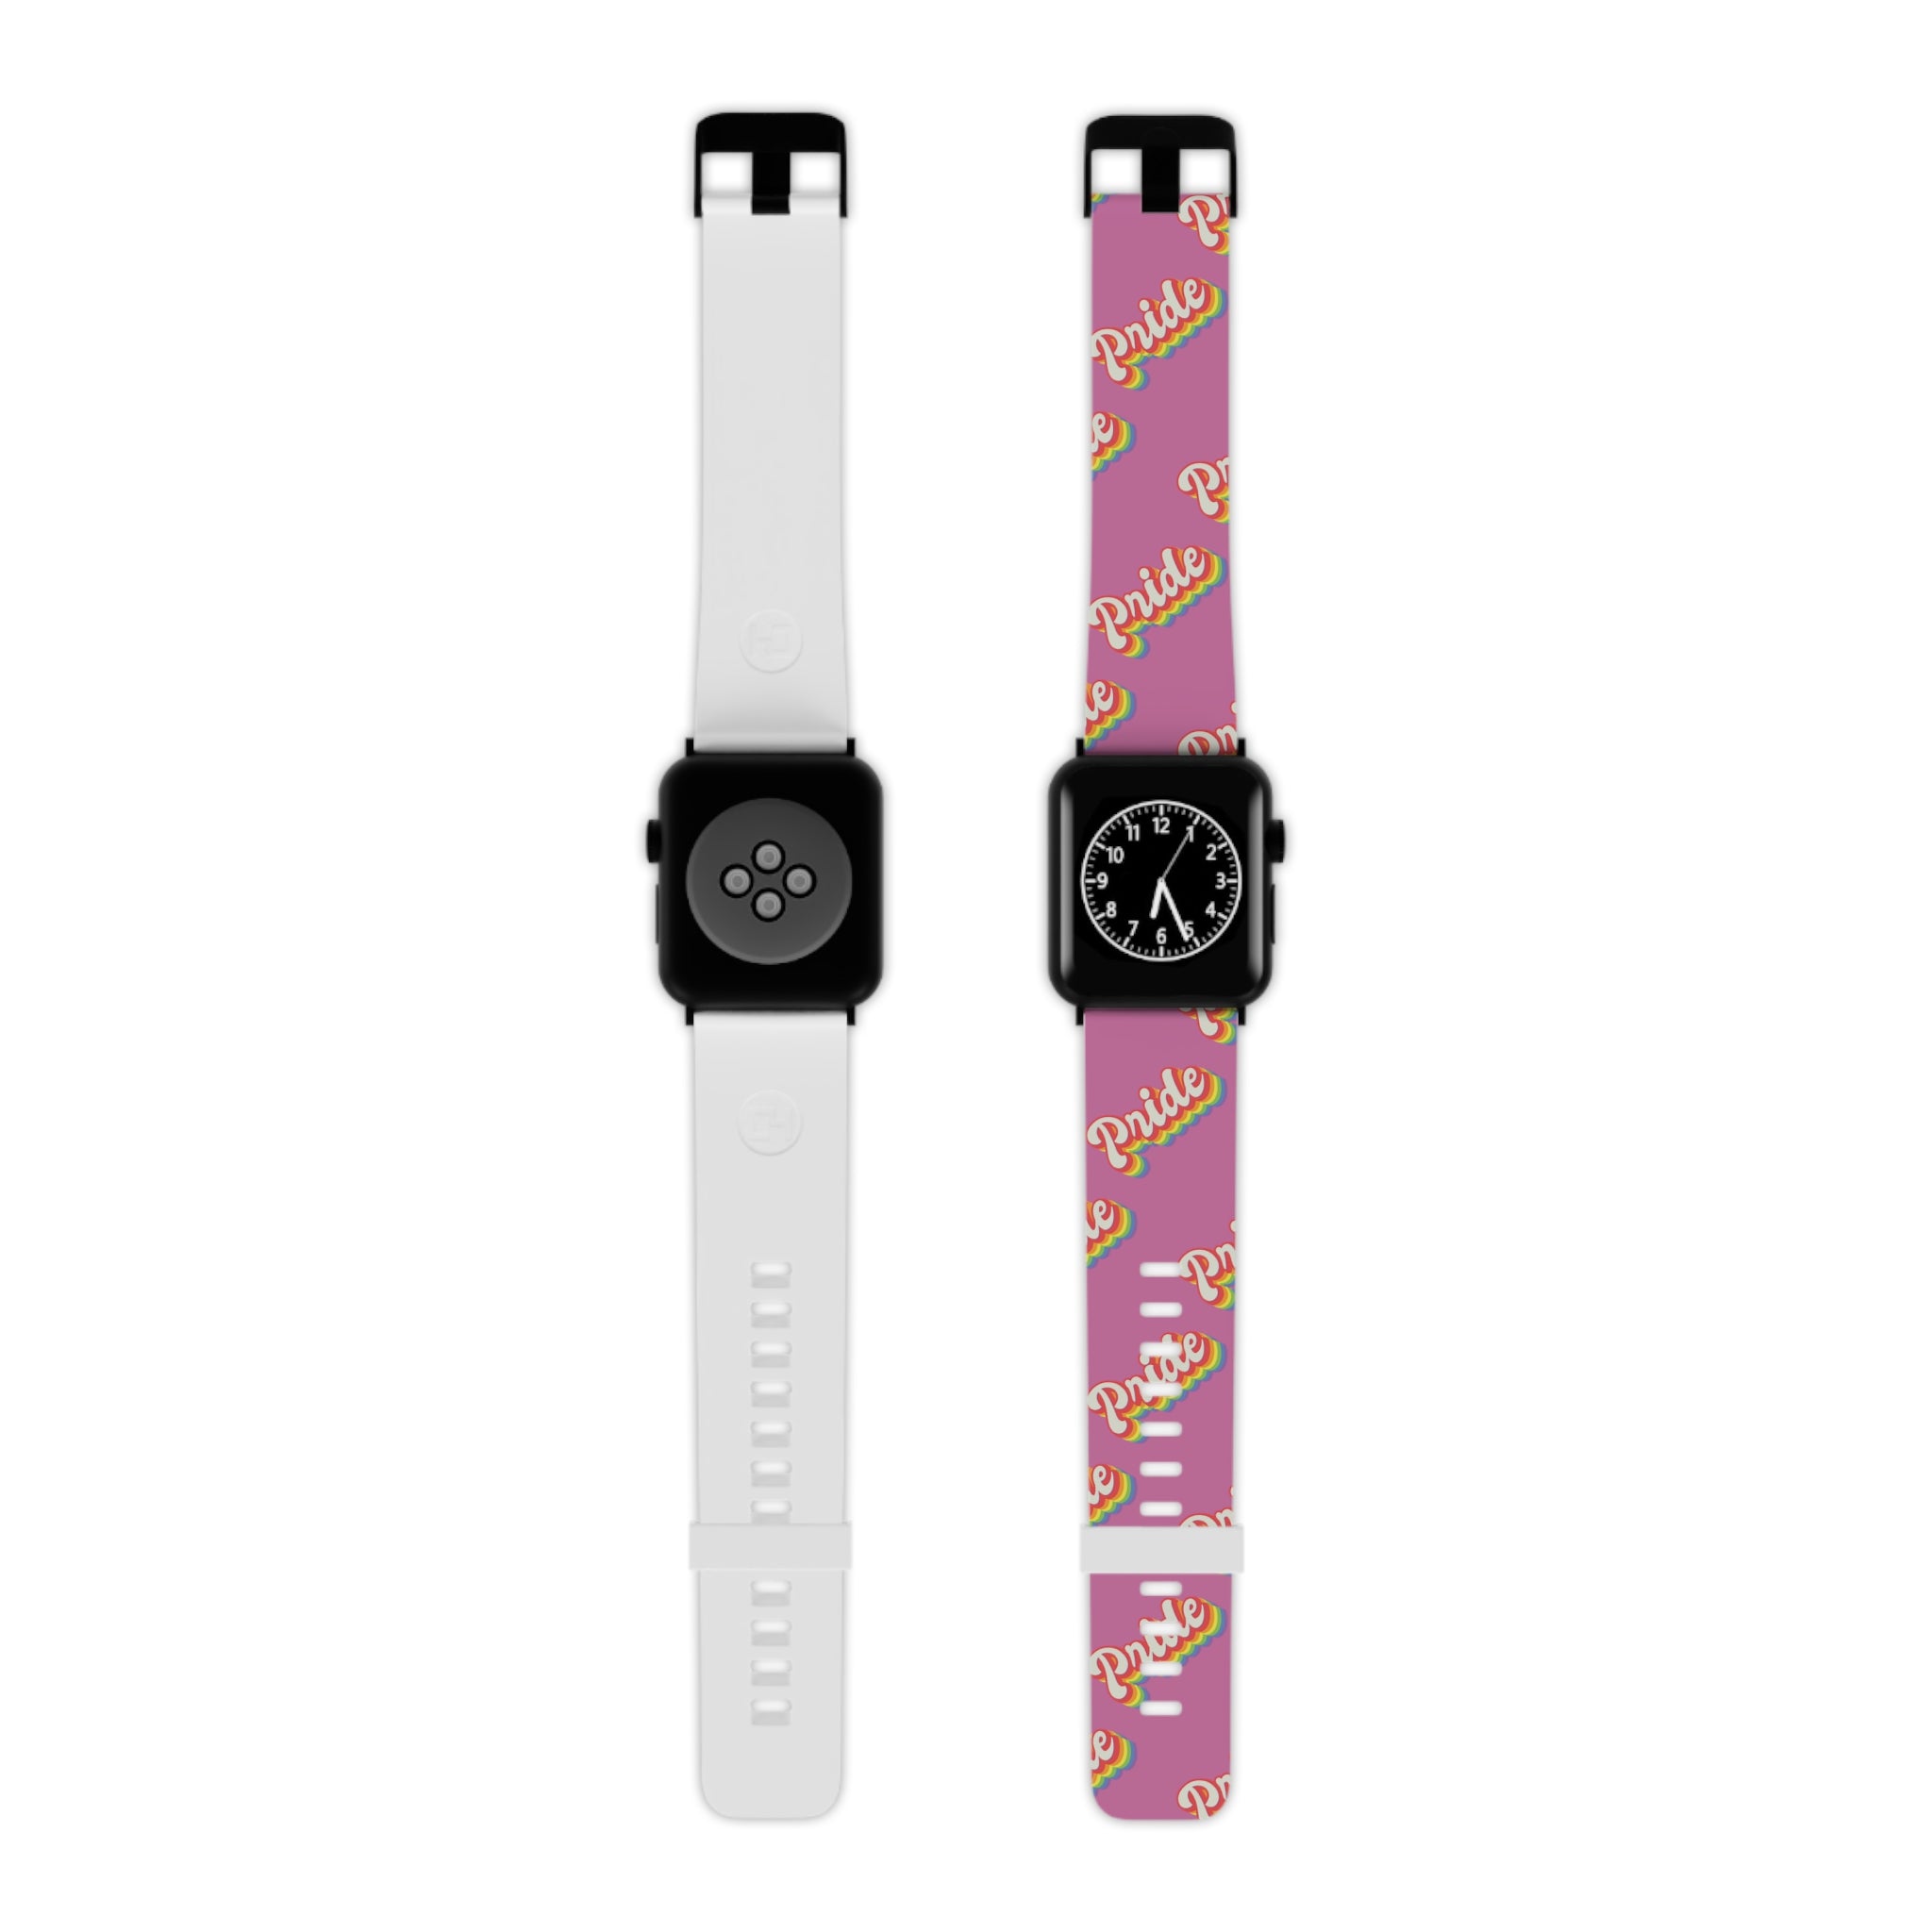 Two custom-printed Pride Bands for Apple Watch with a fashionable pink and white design.